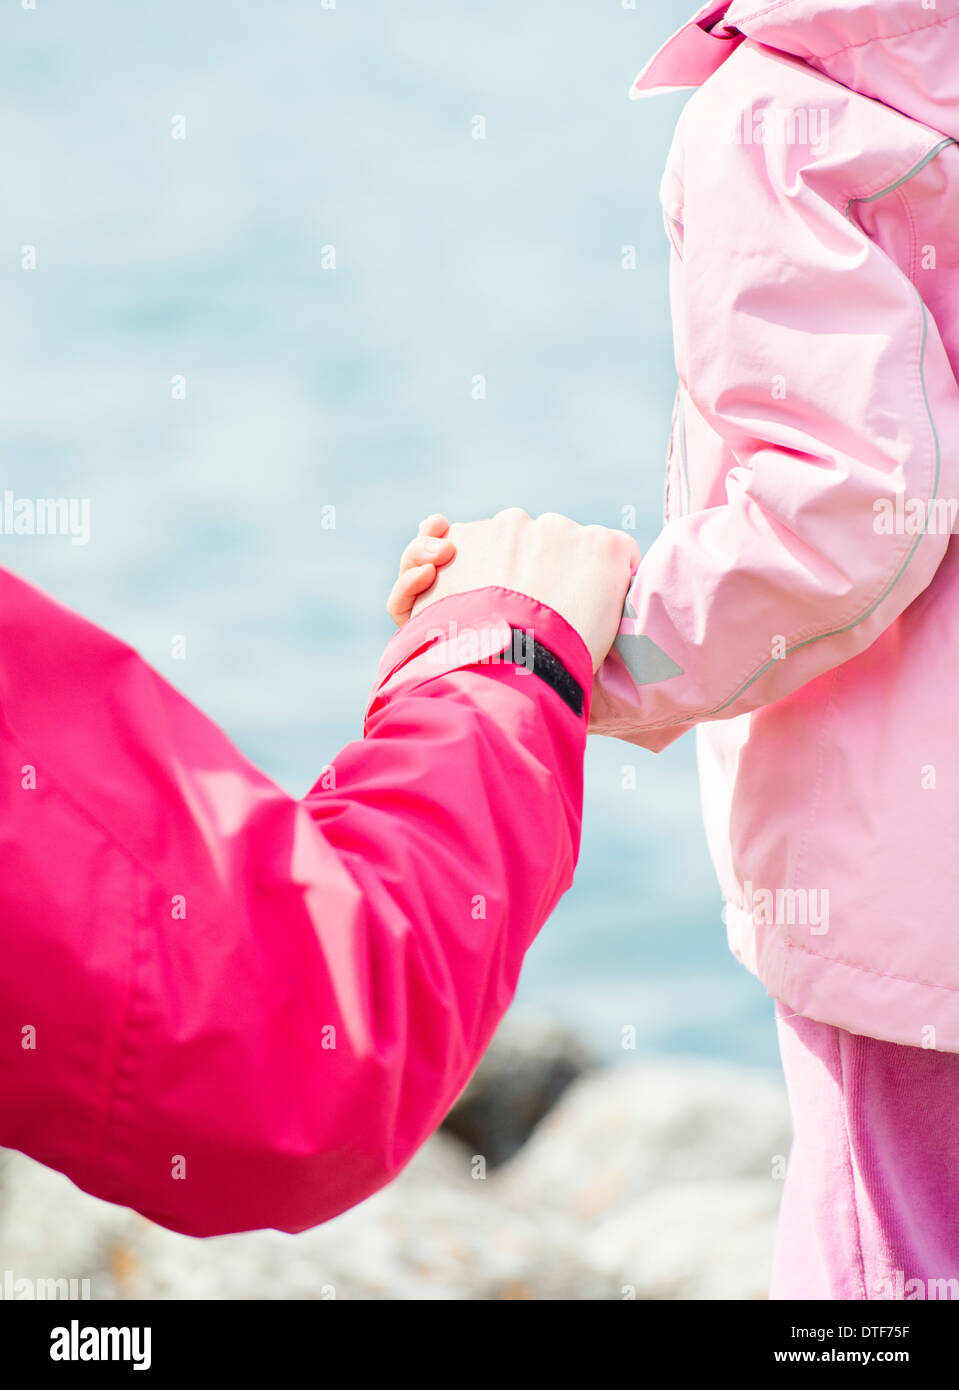 Close up of little girl and woman holding hands in nature setting Stock Photo